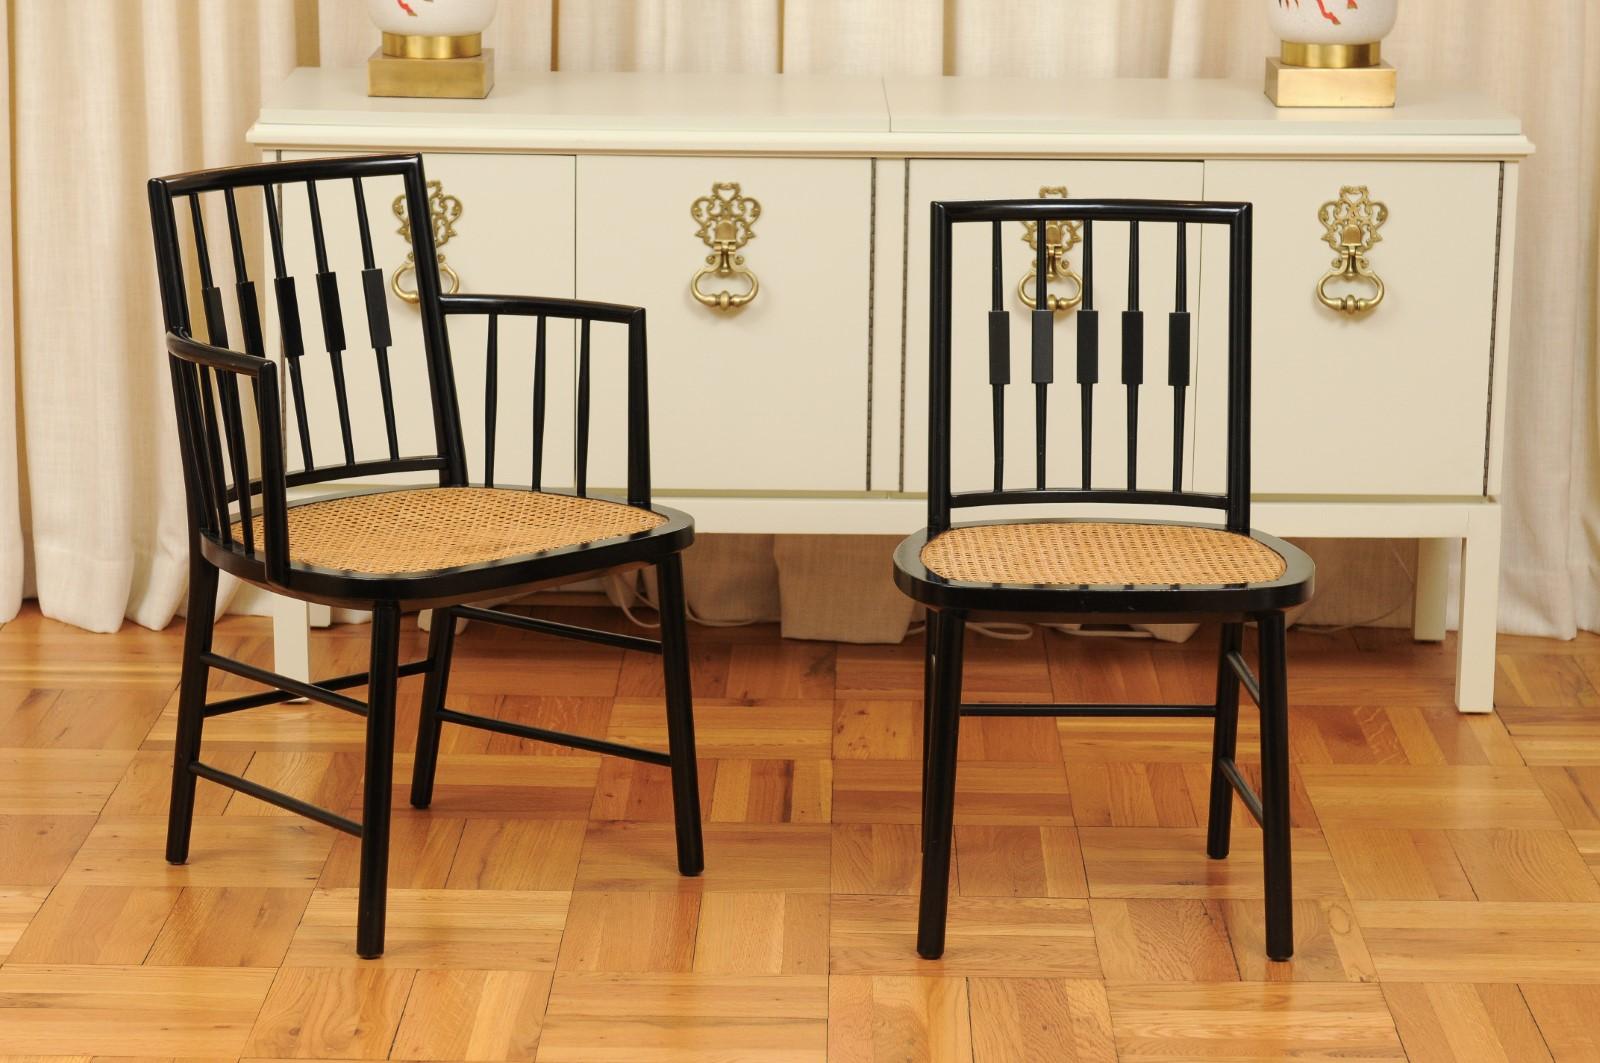 These magnificent dining chairs are shipped as professionally photographed and described in the listing narrative: Meticulously professionally restored and installation ready. New cane seats. Expert custom upholstery service is available.

A